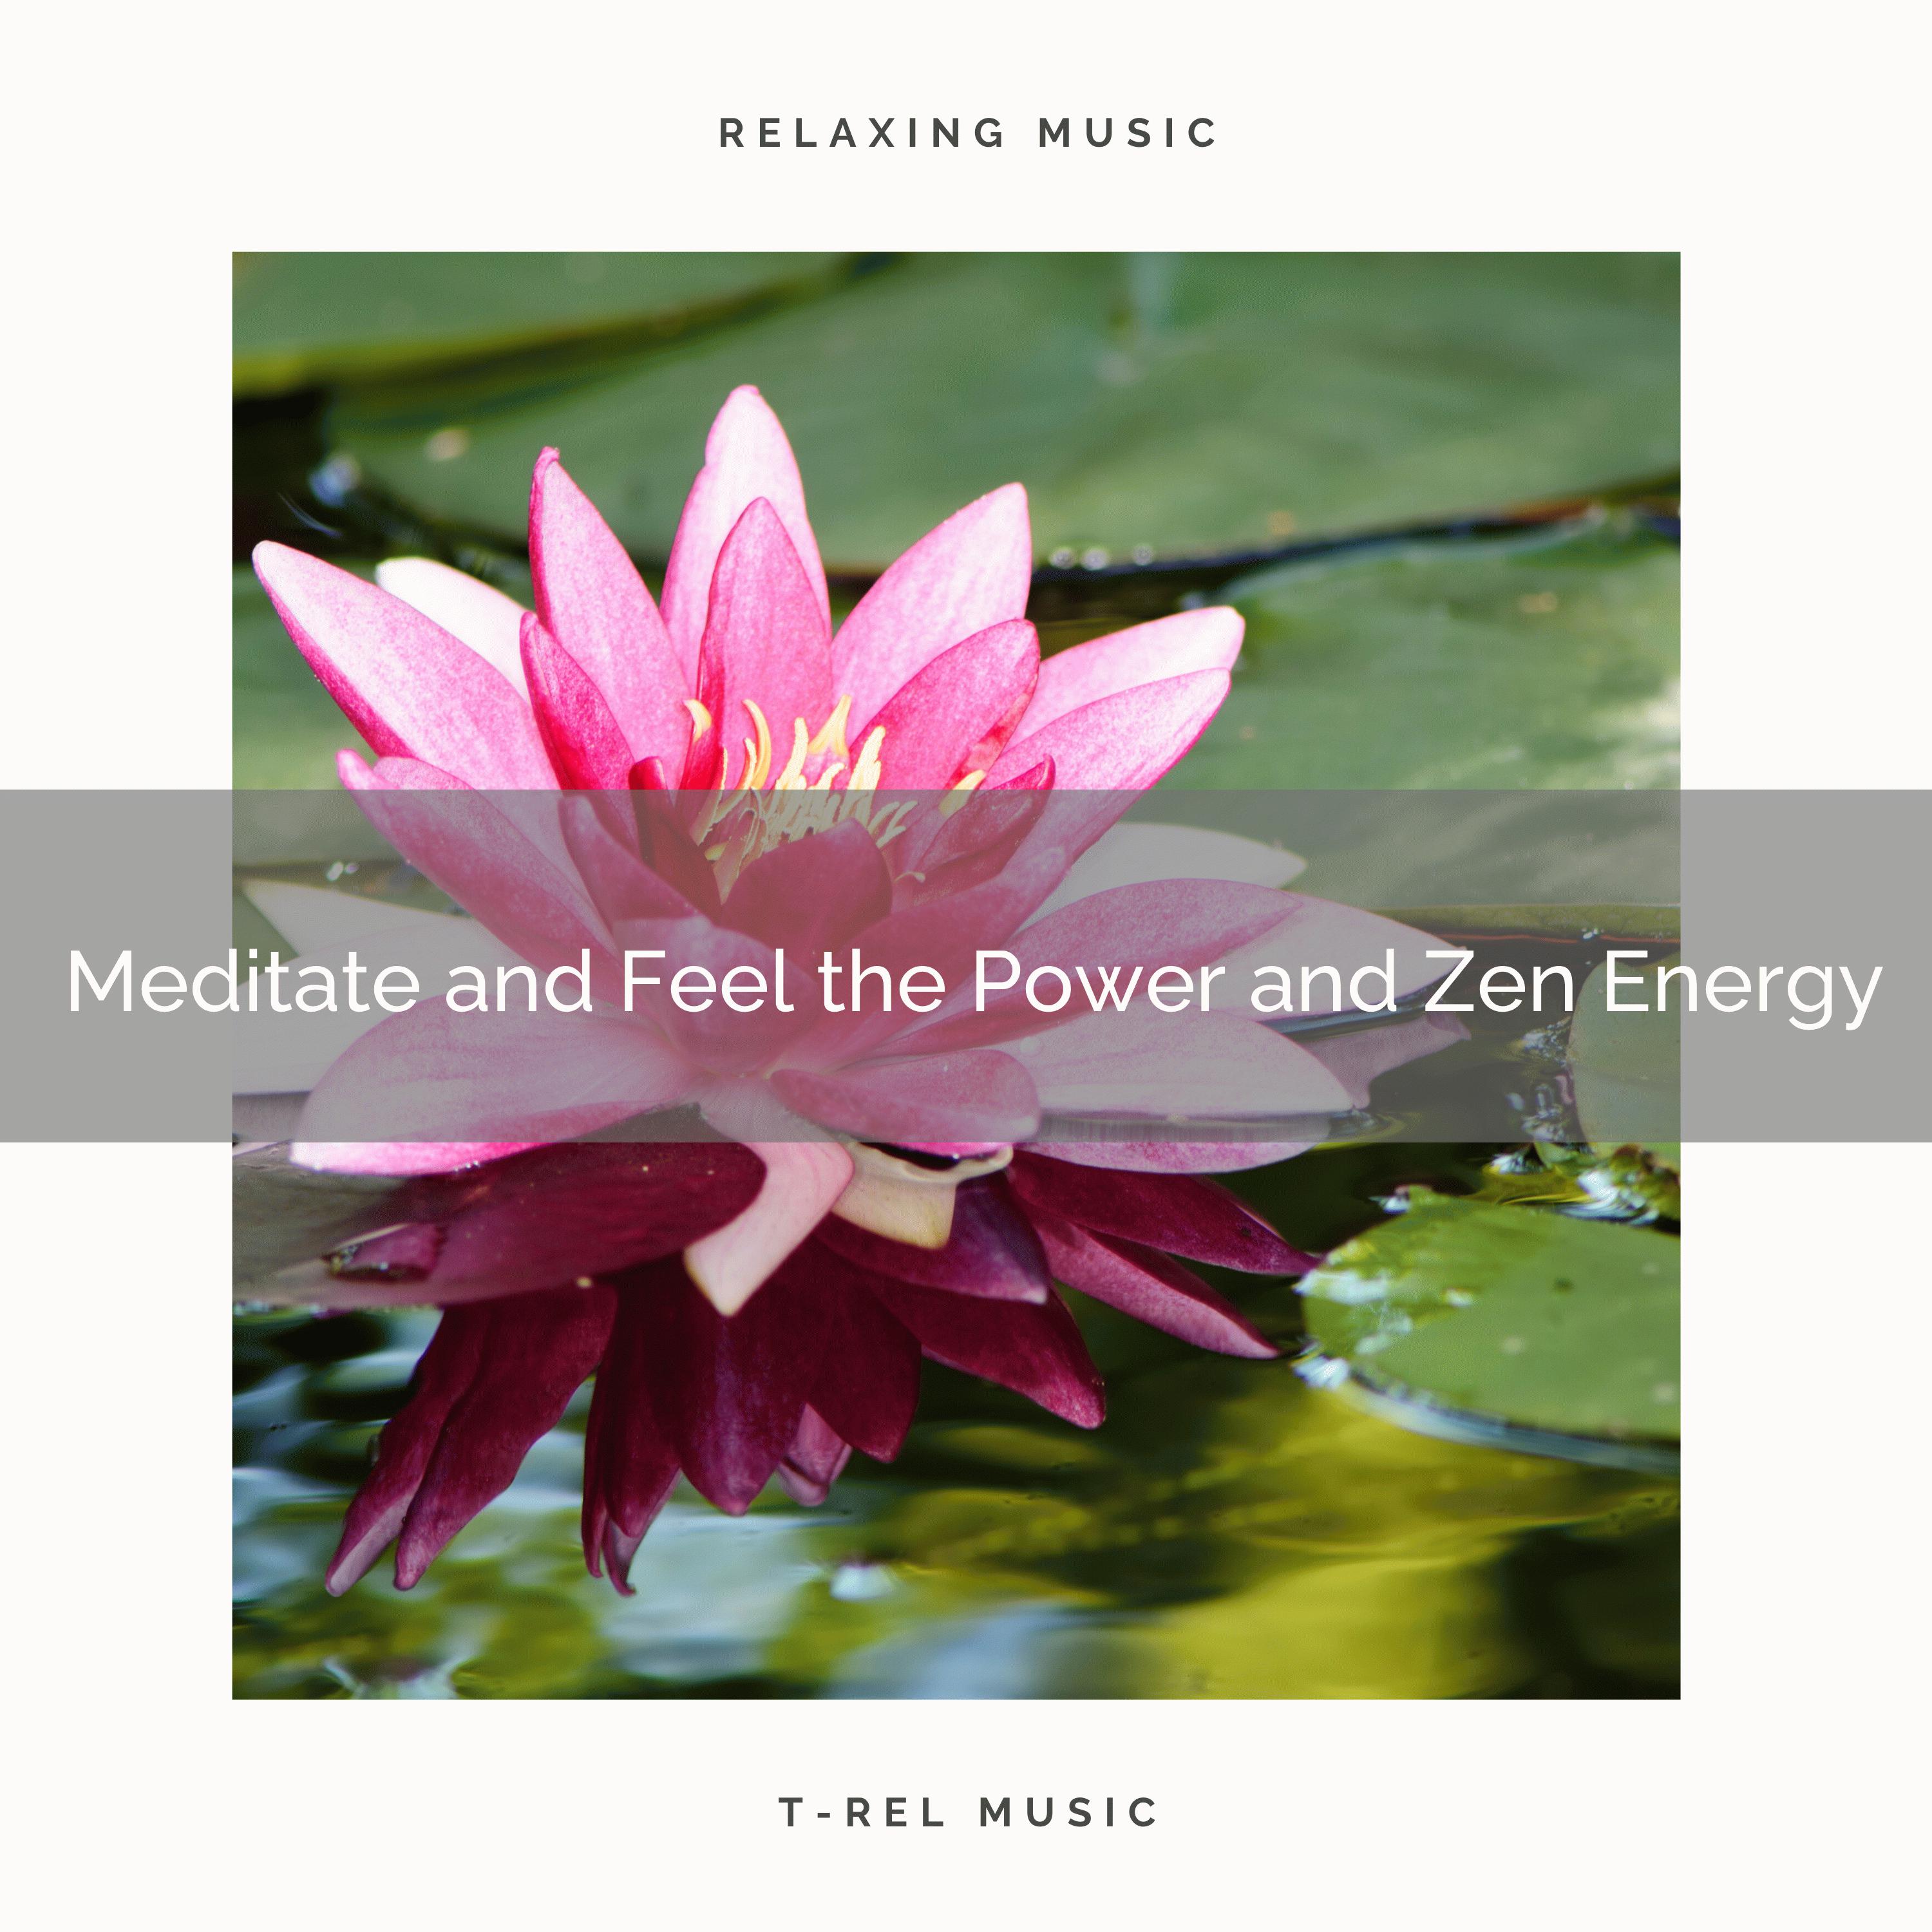 Non-stop Relax - Meditate and Feel the Power and Zen Energy